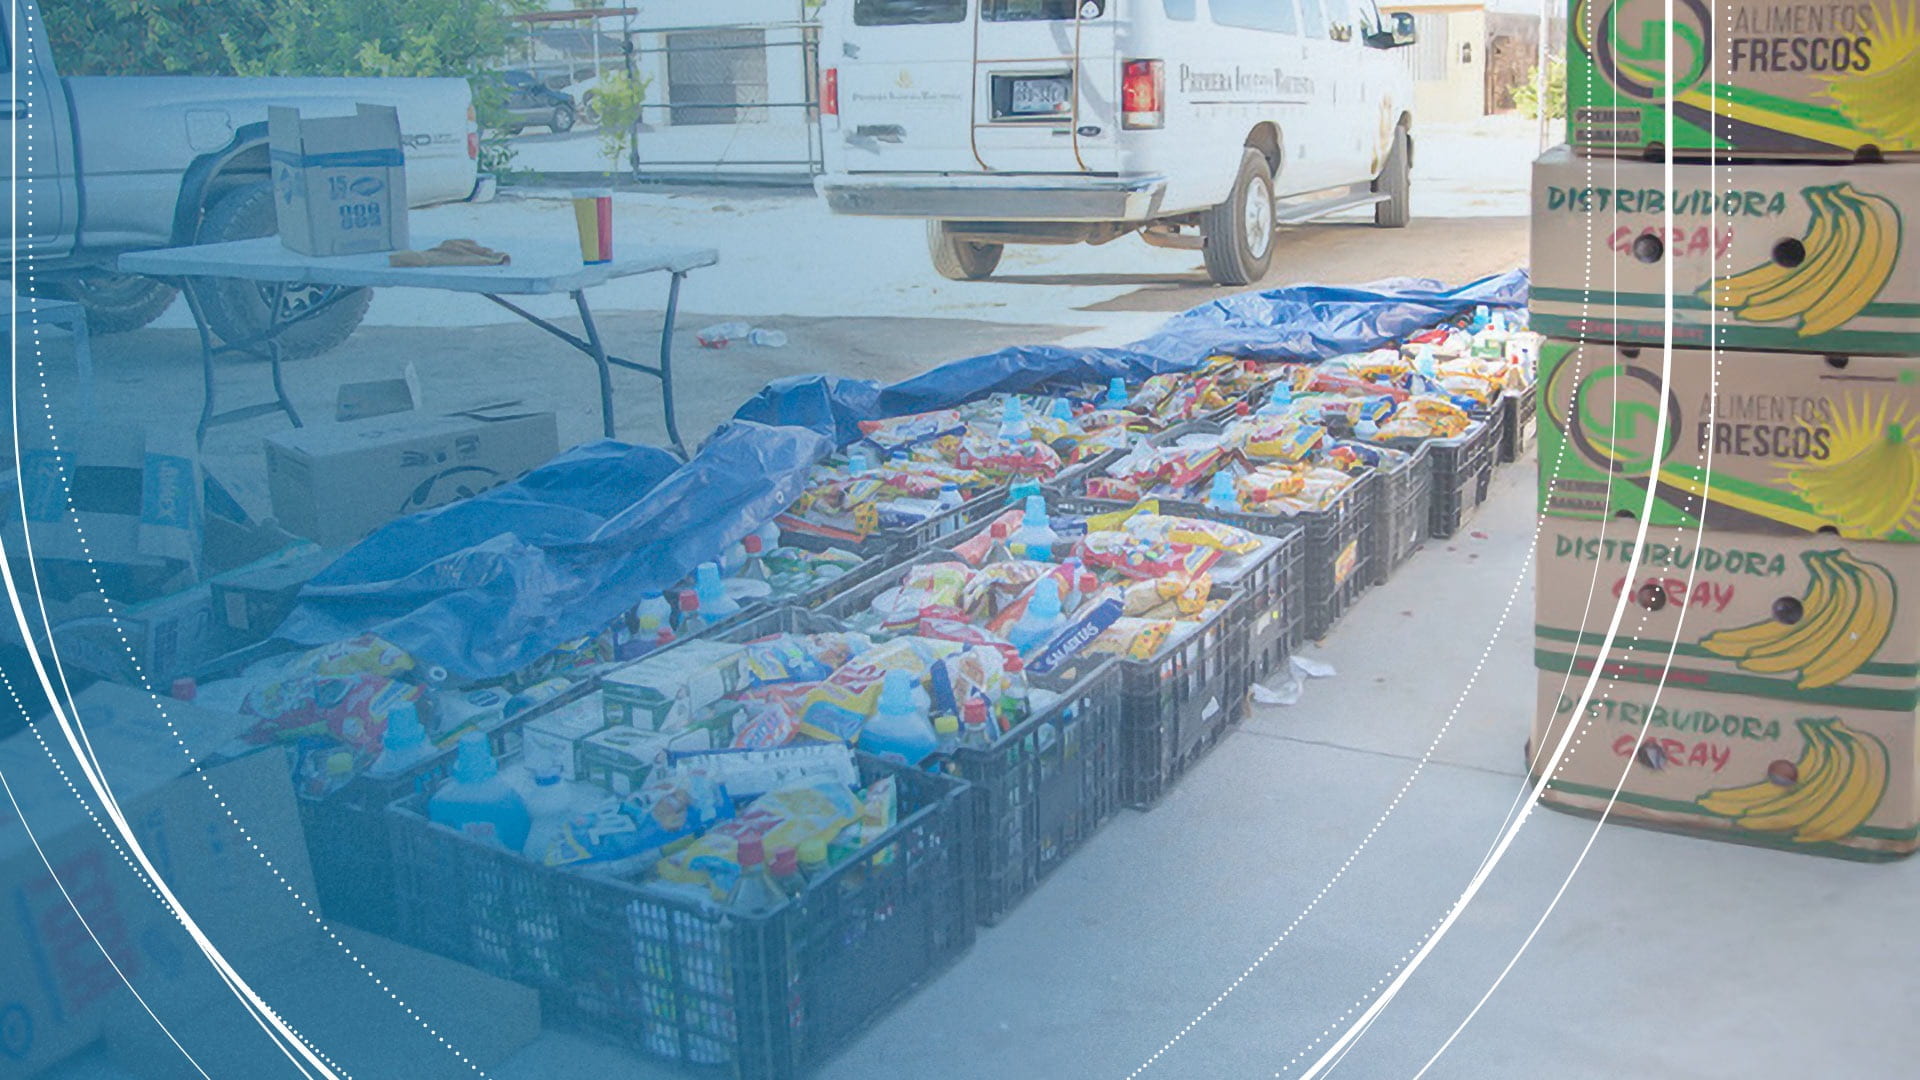 A shipment of food and cleaning supplies on pavement behind a van in San Luis Rio Colorado, Mexico